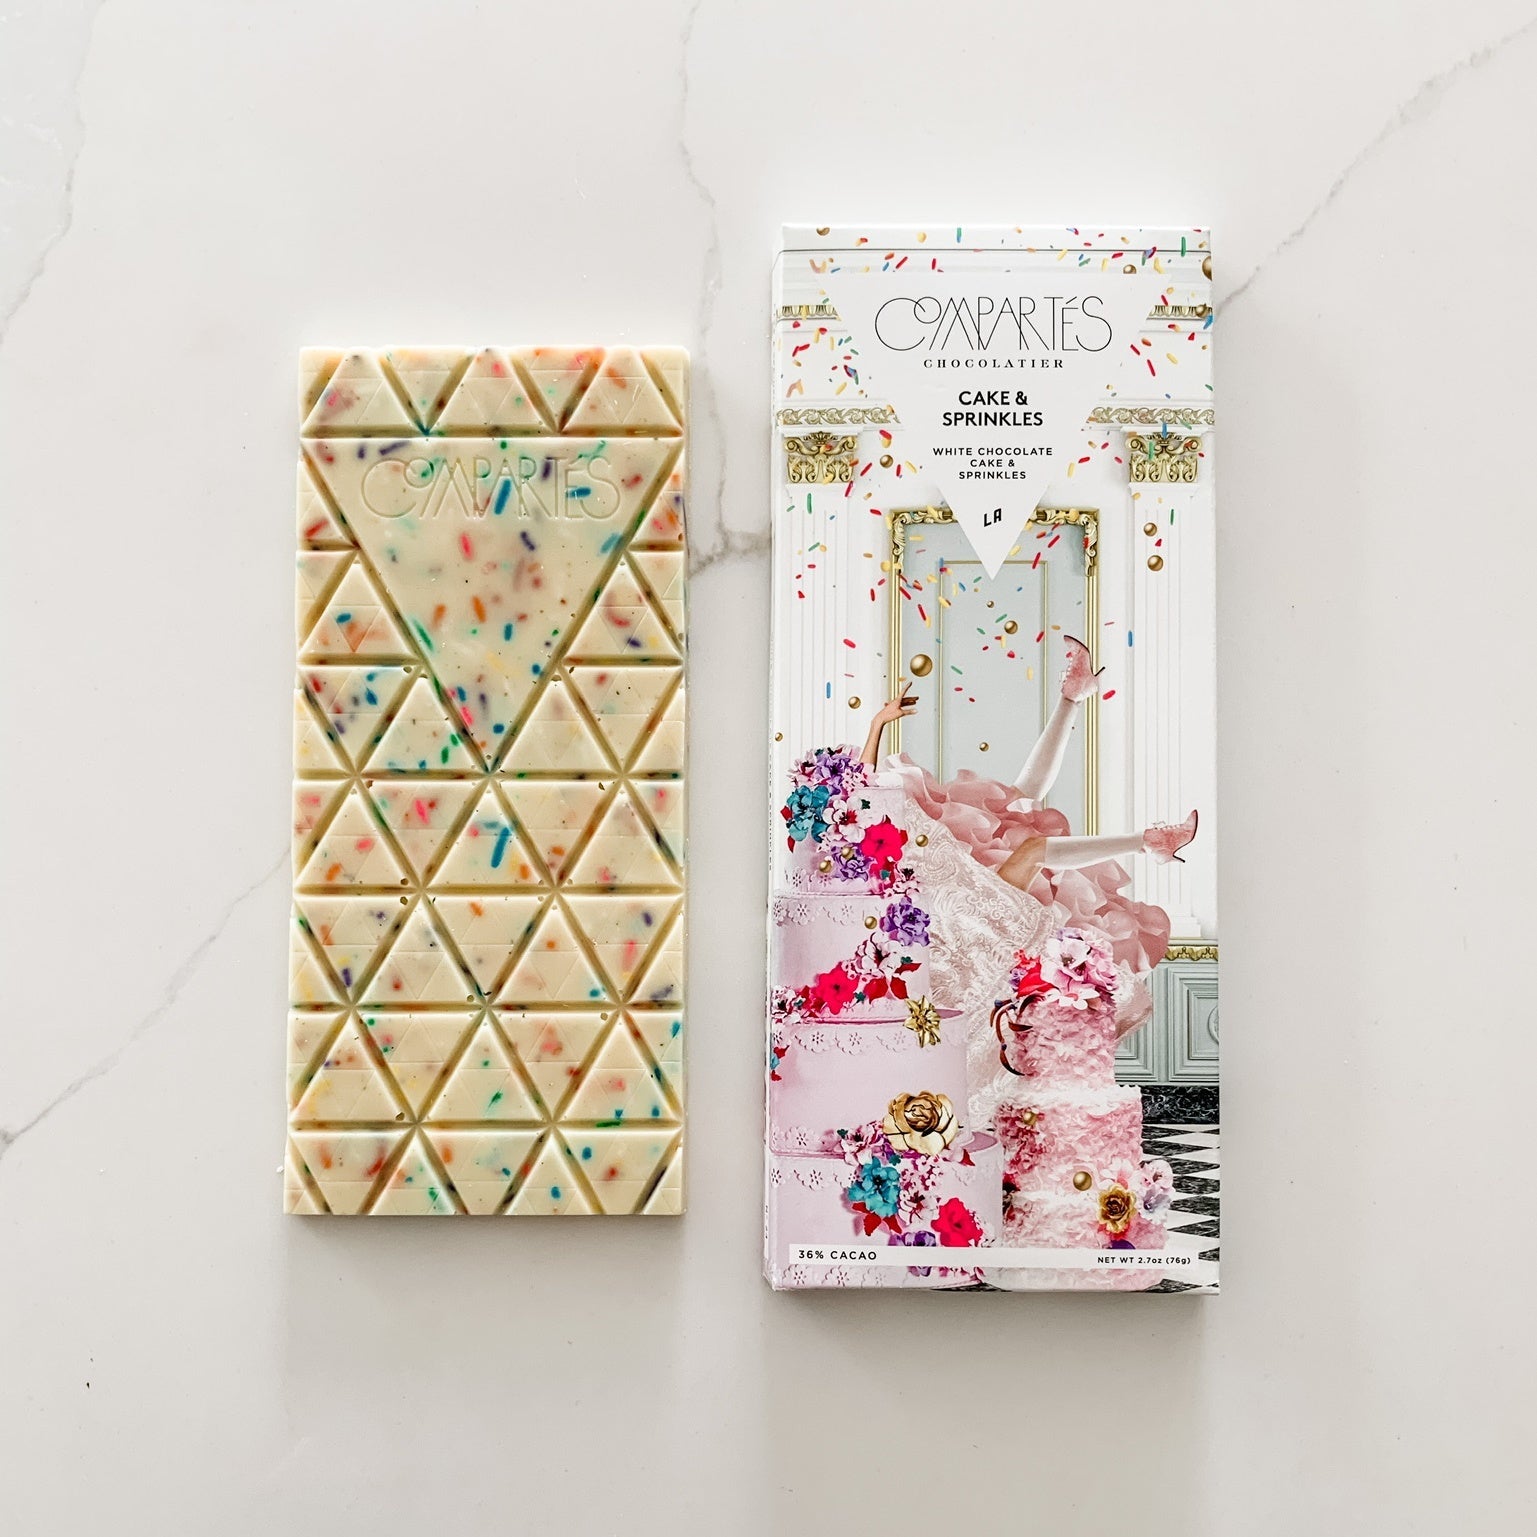 White chocolate bar with sprinkles next to packaging featuring ornate cake with woman stuck in it.